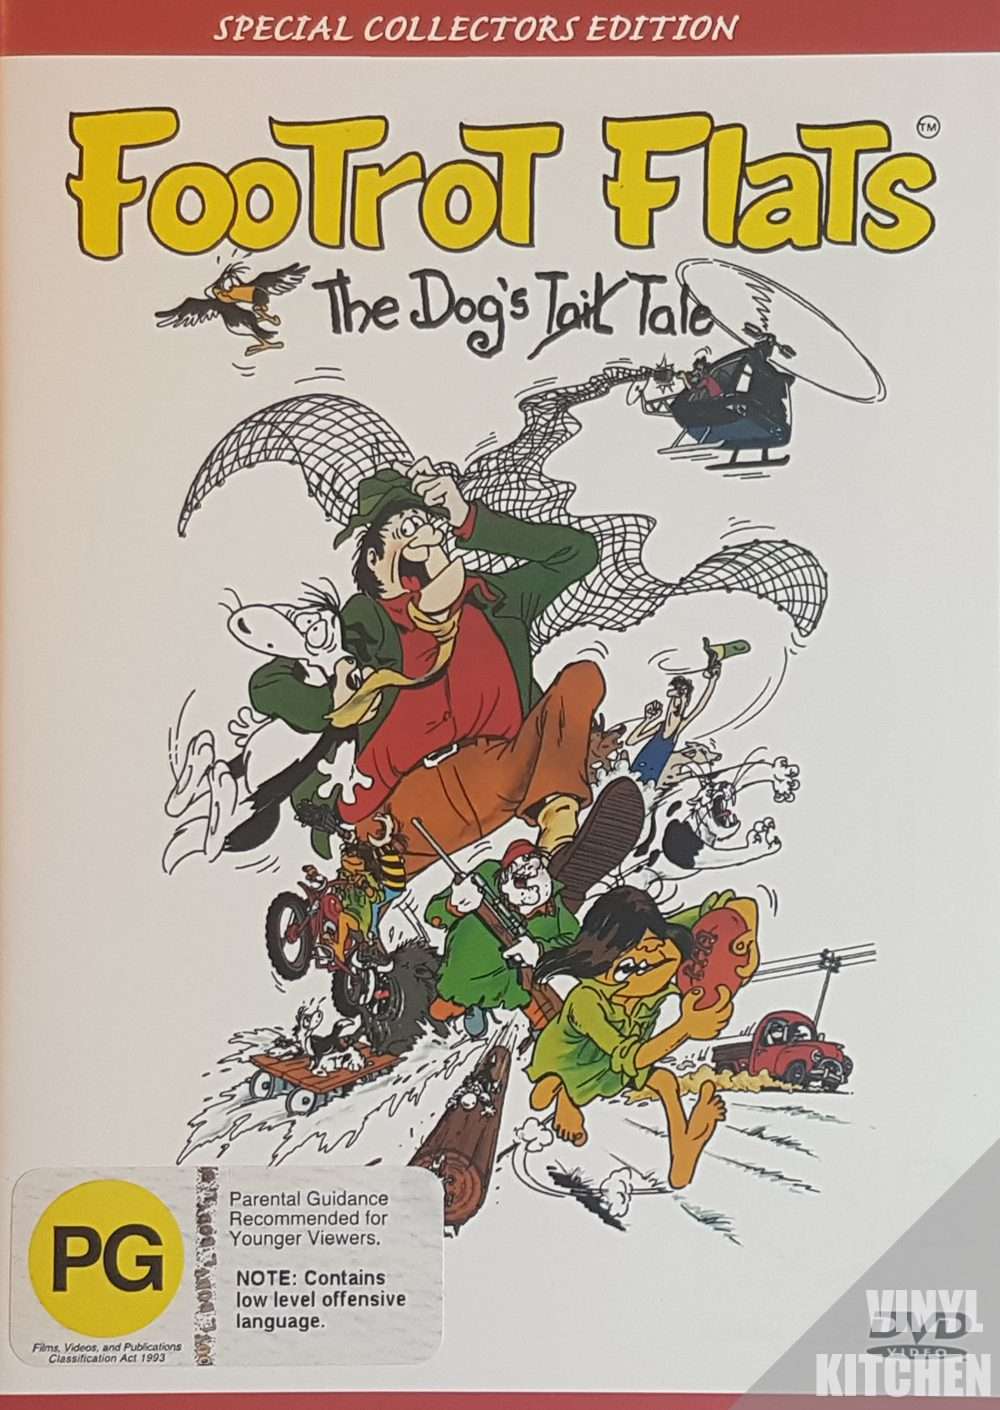 Footrot Flats: The Dog's Tale (Special Collector's Edition)